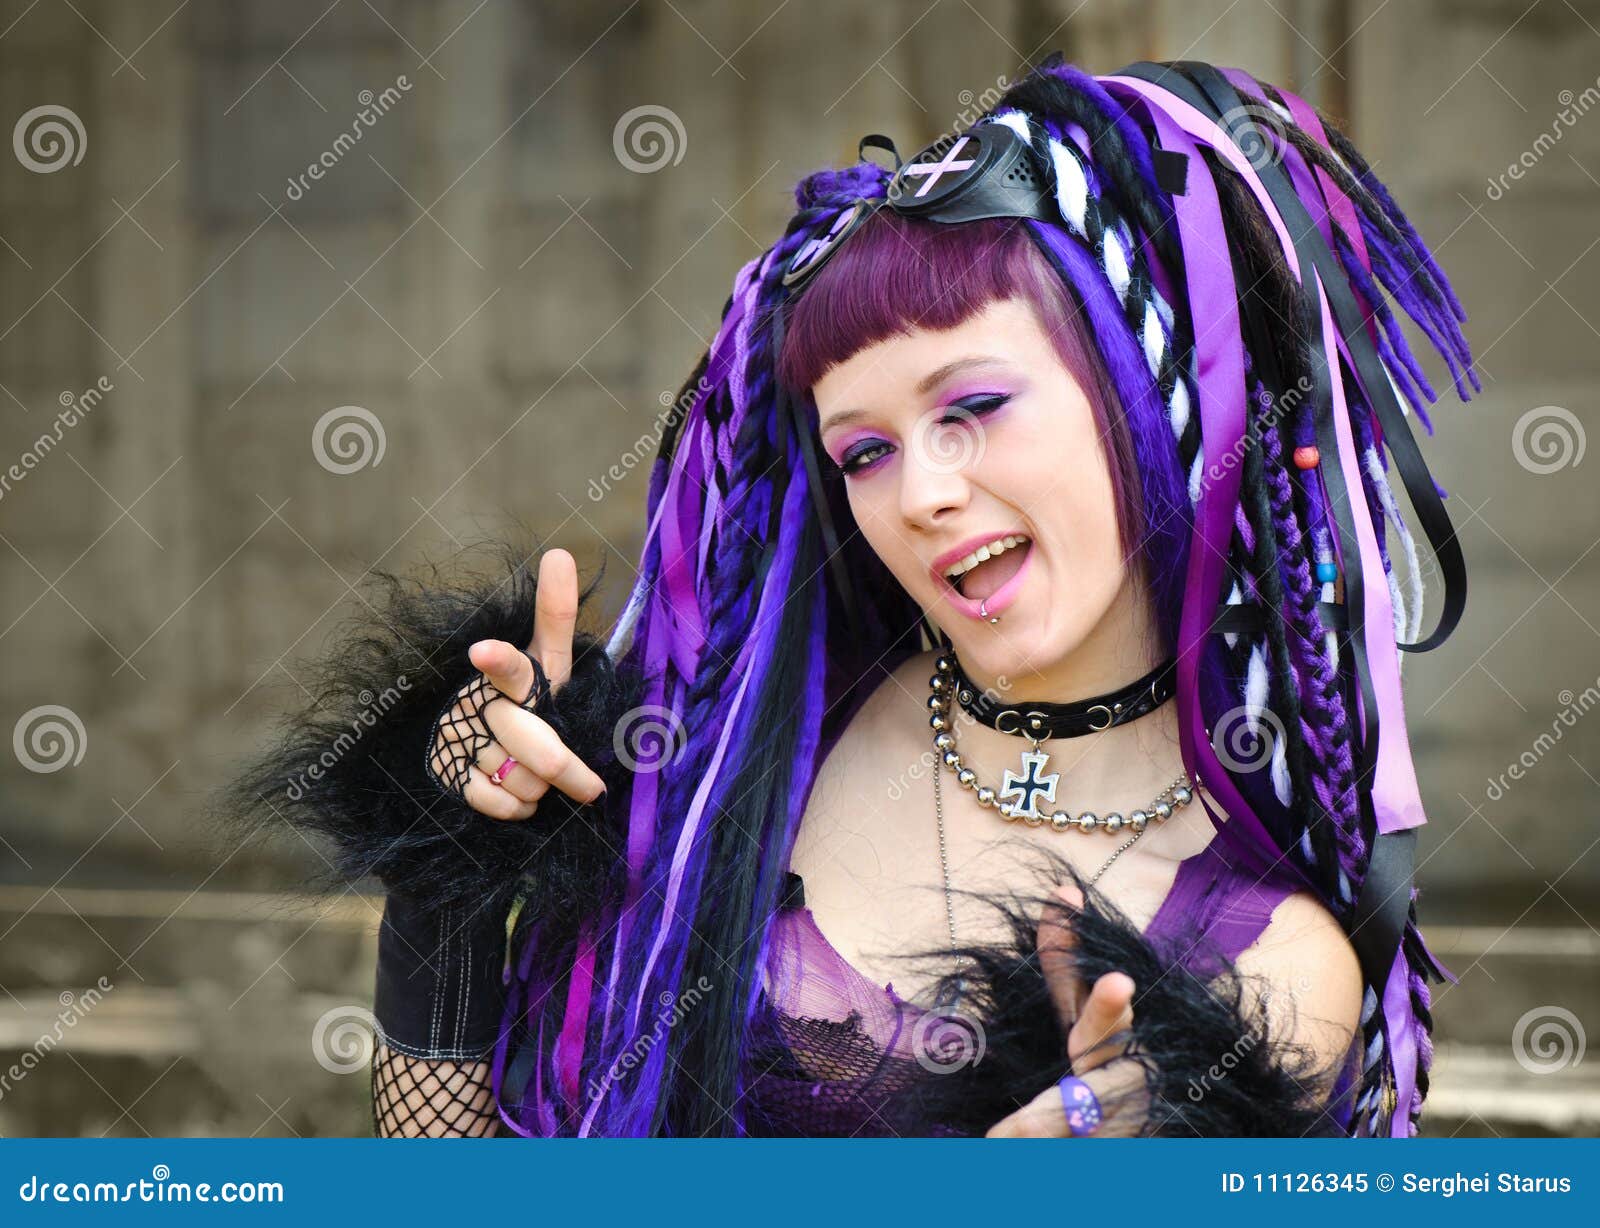 david bowser recommends cyber goth girl pic